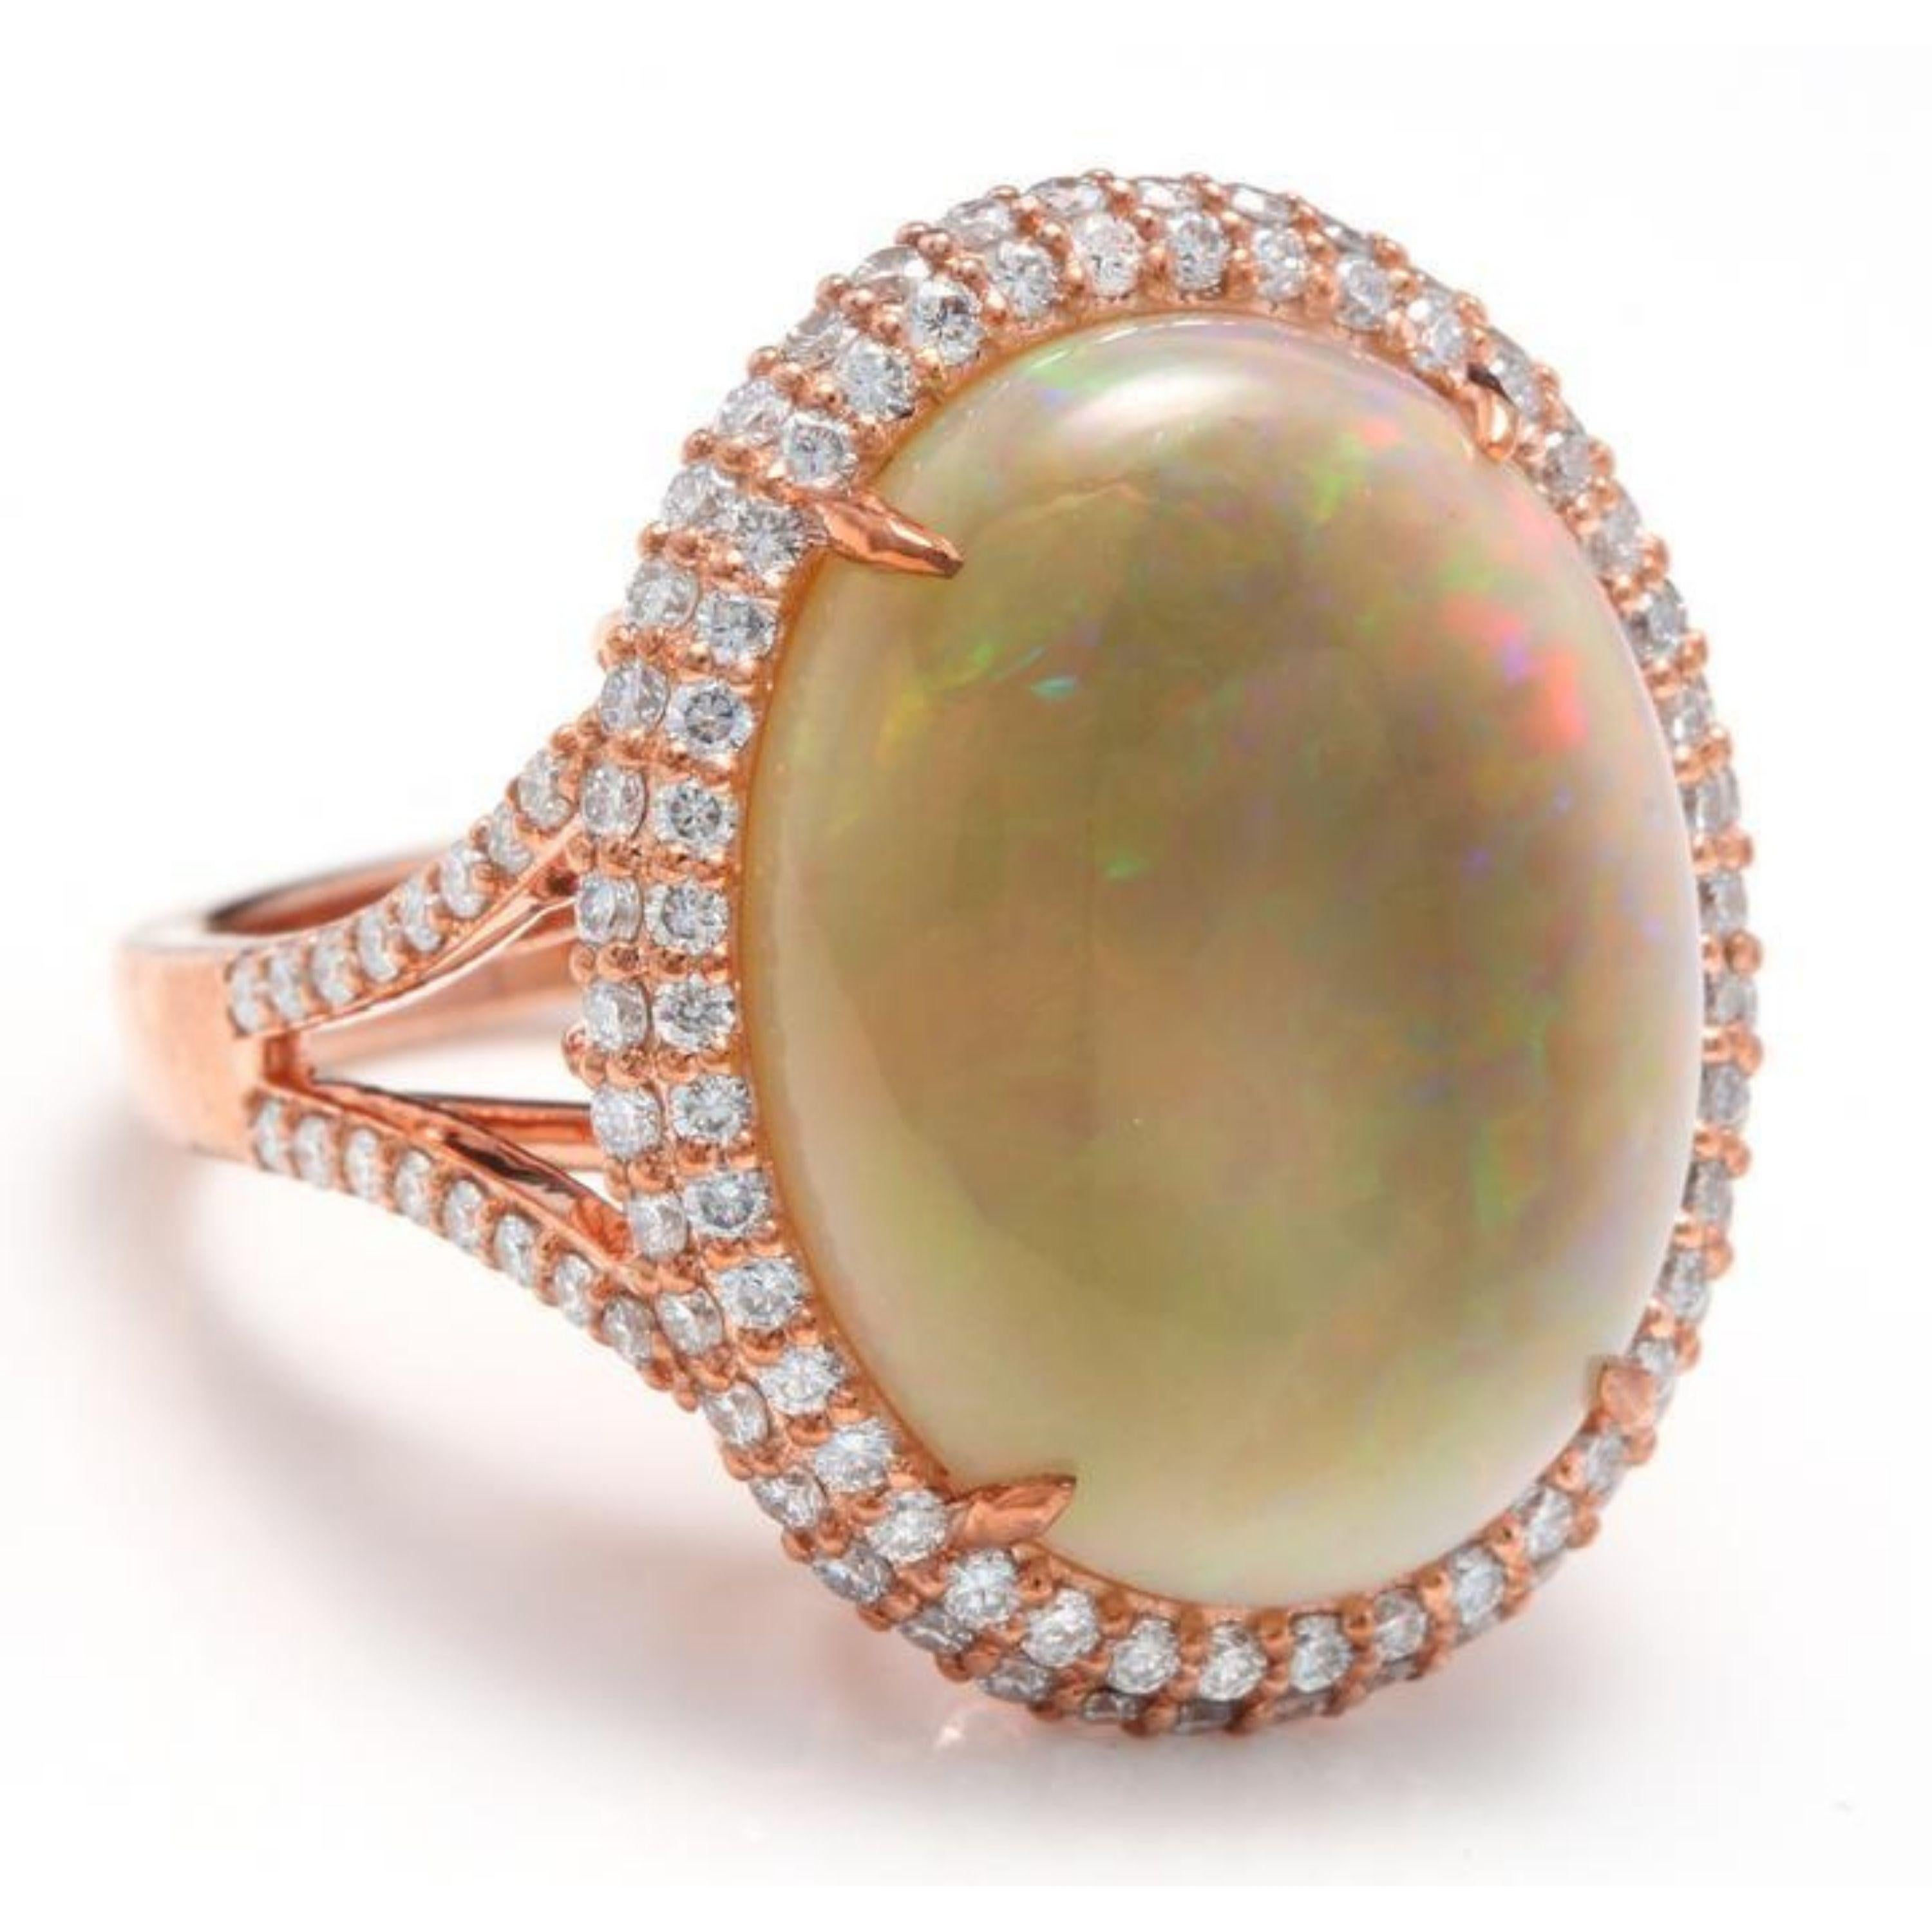 8.60 Carats Natural Impressive Australian Opal and Diamond 14K Solid Rose Gold Ring

The opal has beautiful fire, pictures don't show the whole beauty of the opal!

Total Natural Opal Weight is: Approx. 7.50 Carats

Opal Measures: Approx. 19.50 x